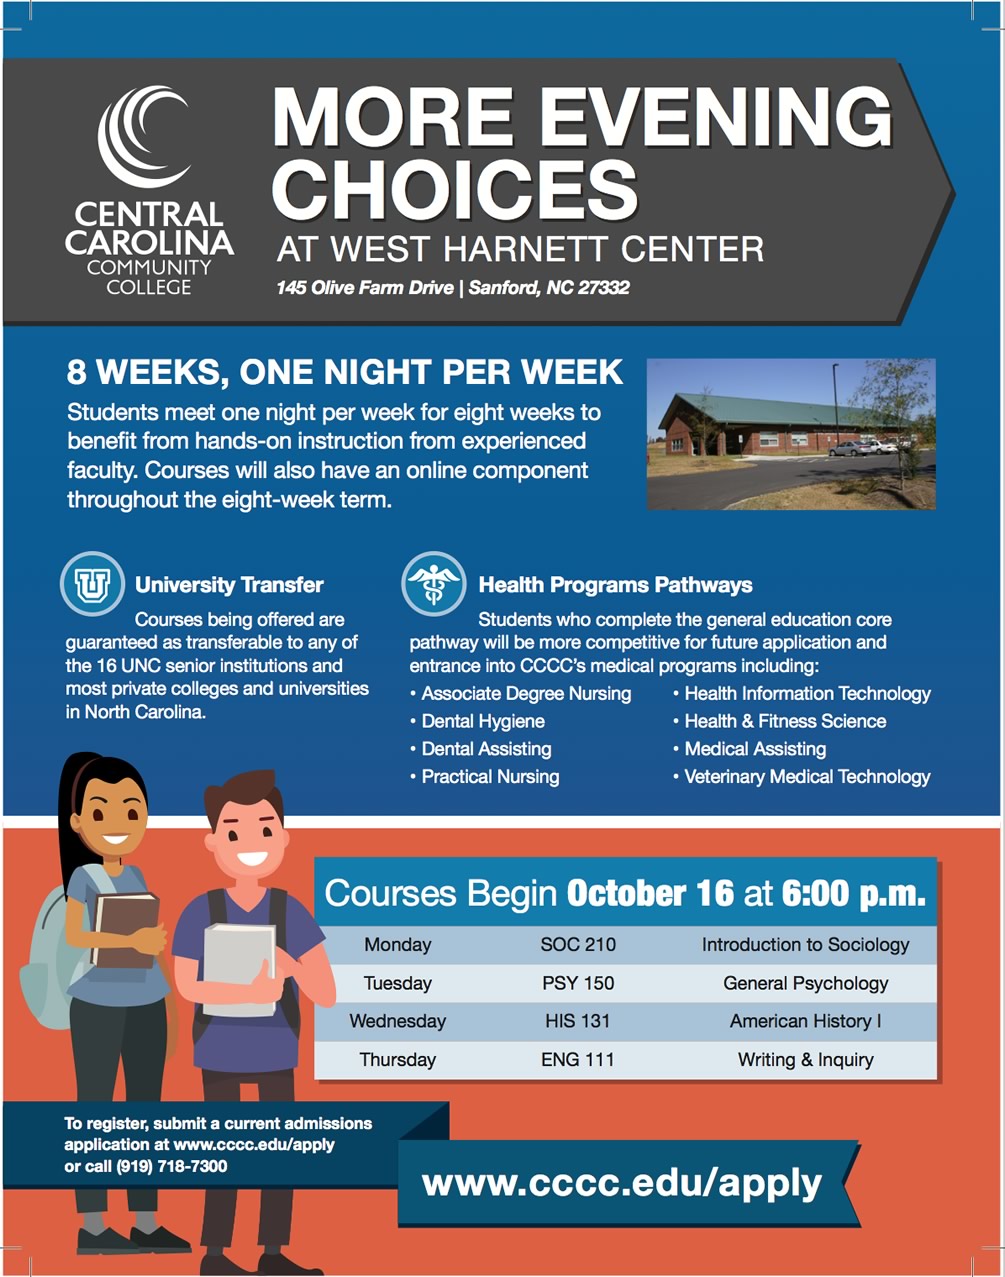 CCCC offers evening choices at West Harnett Center